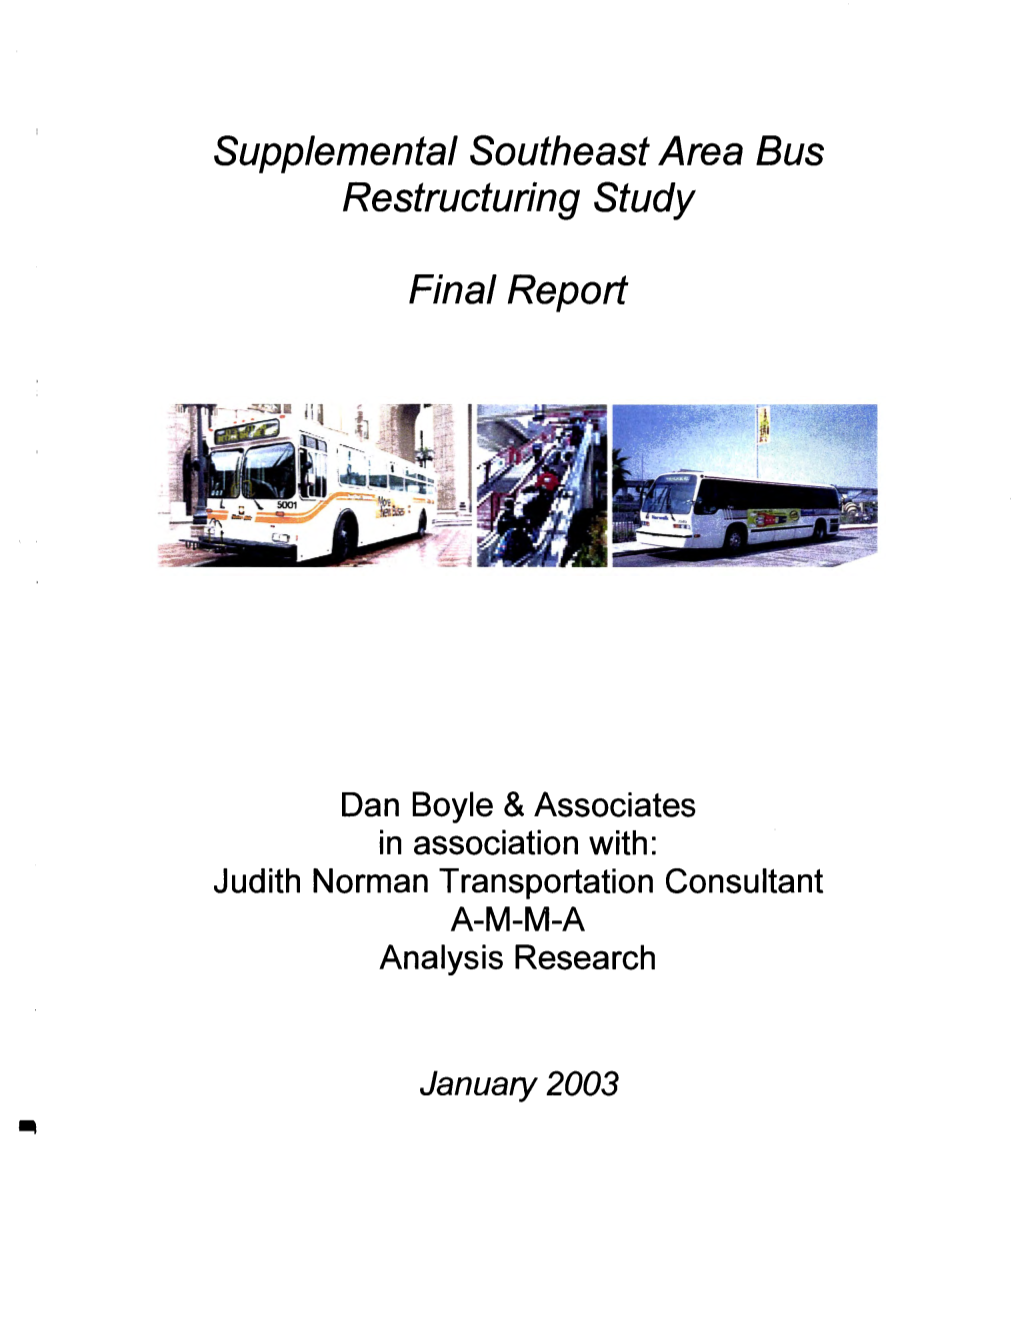 Supplemental Southeast Area Bus Restructuring Study